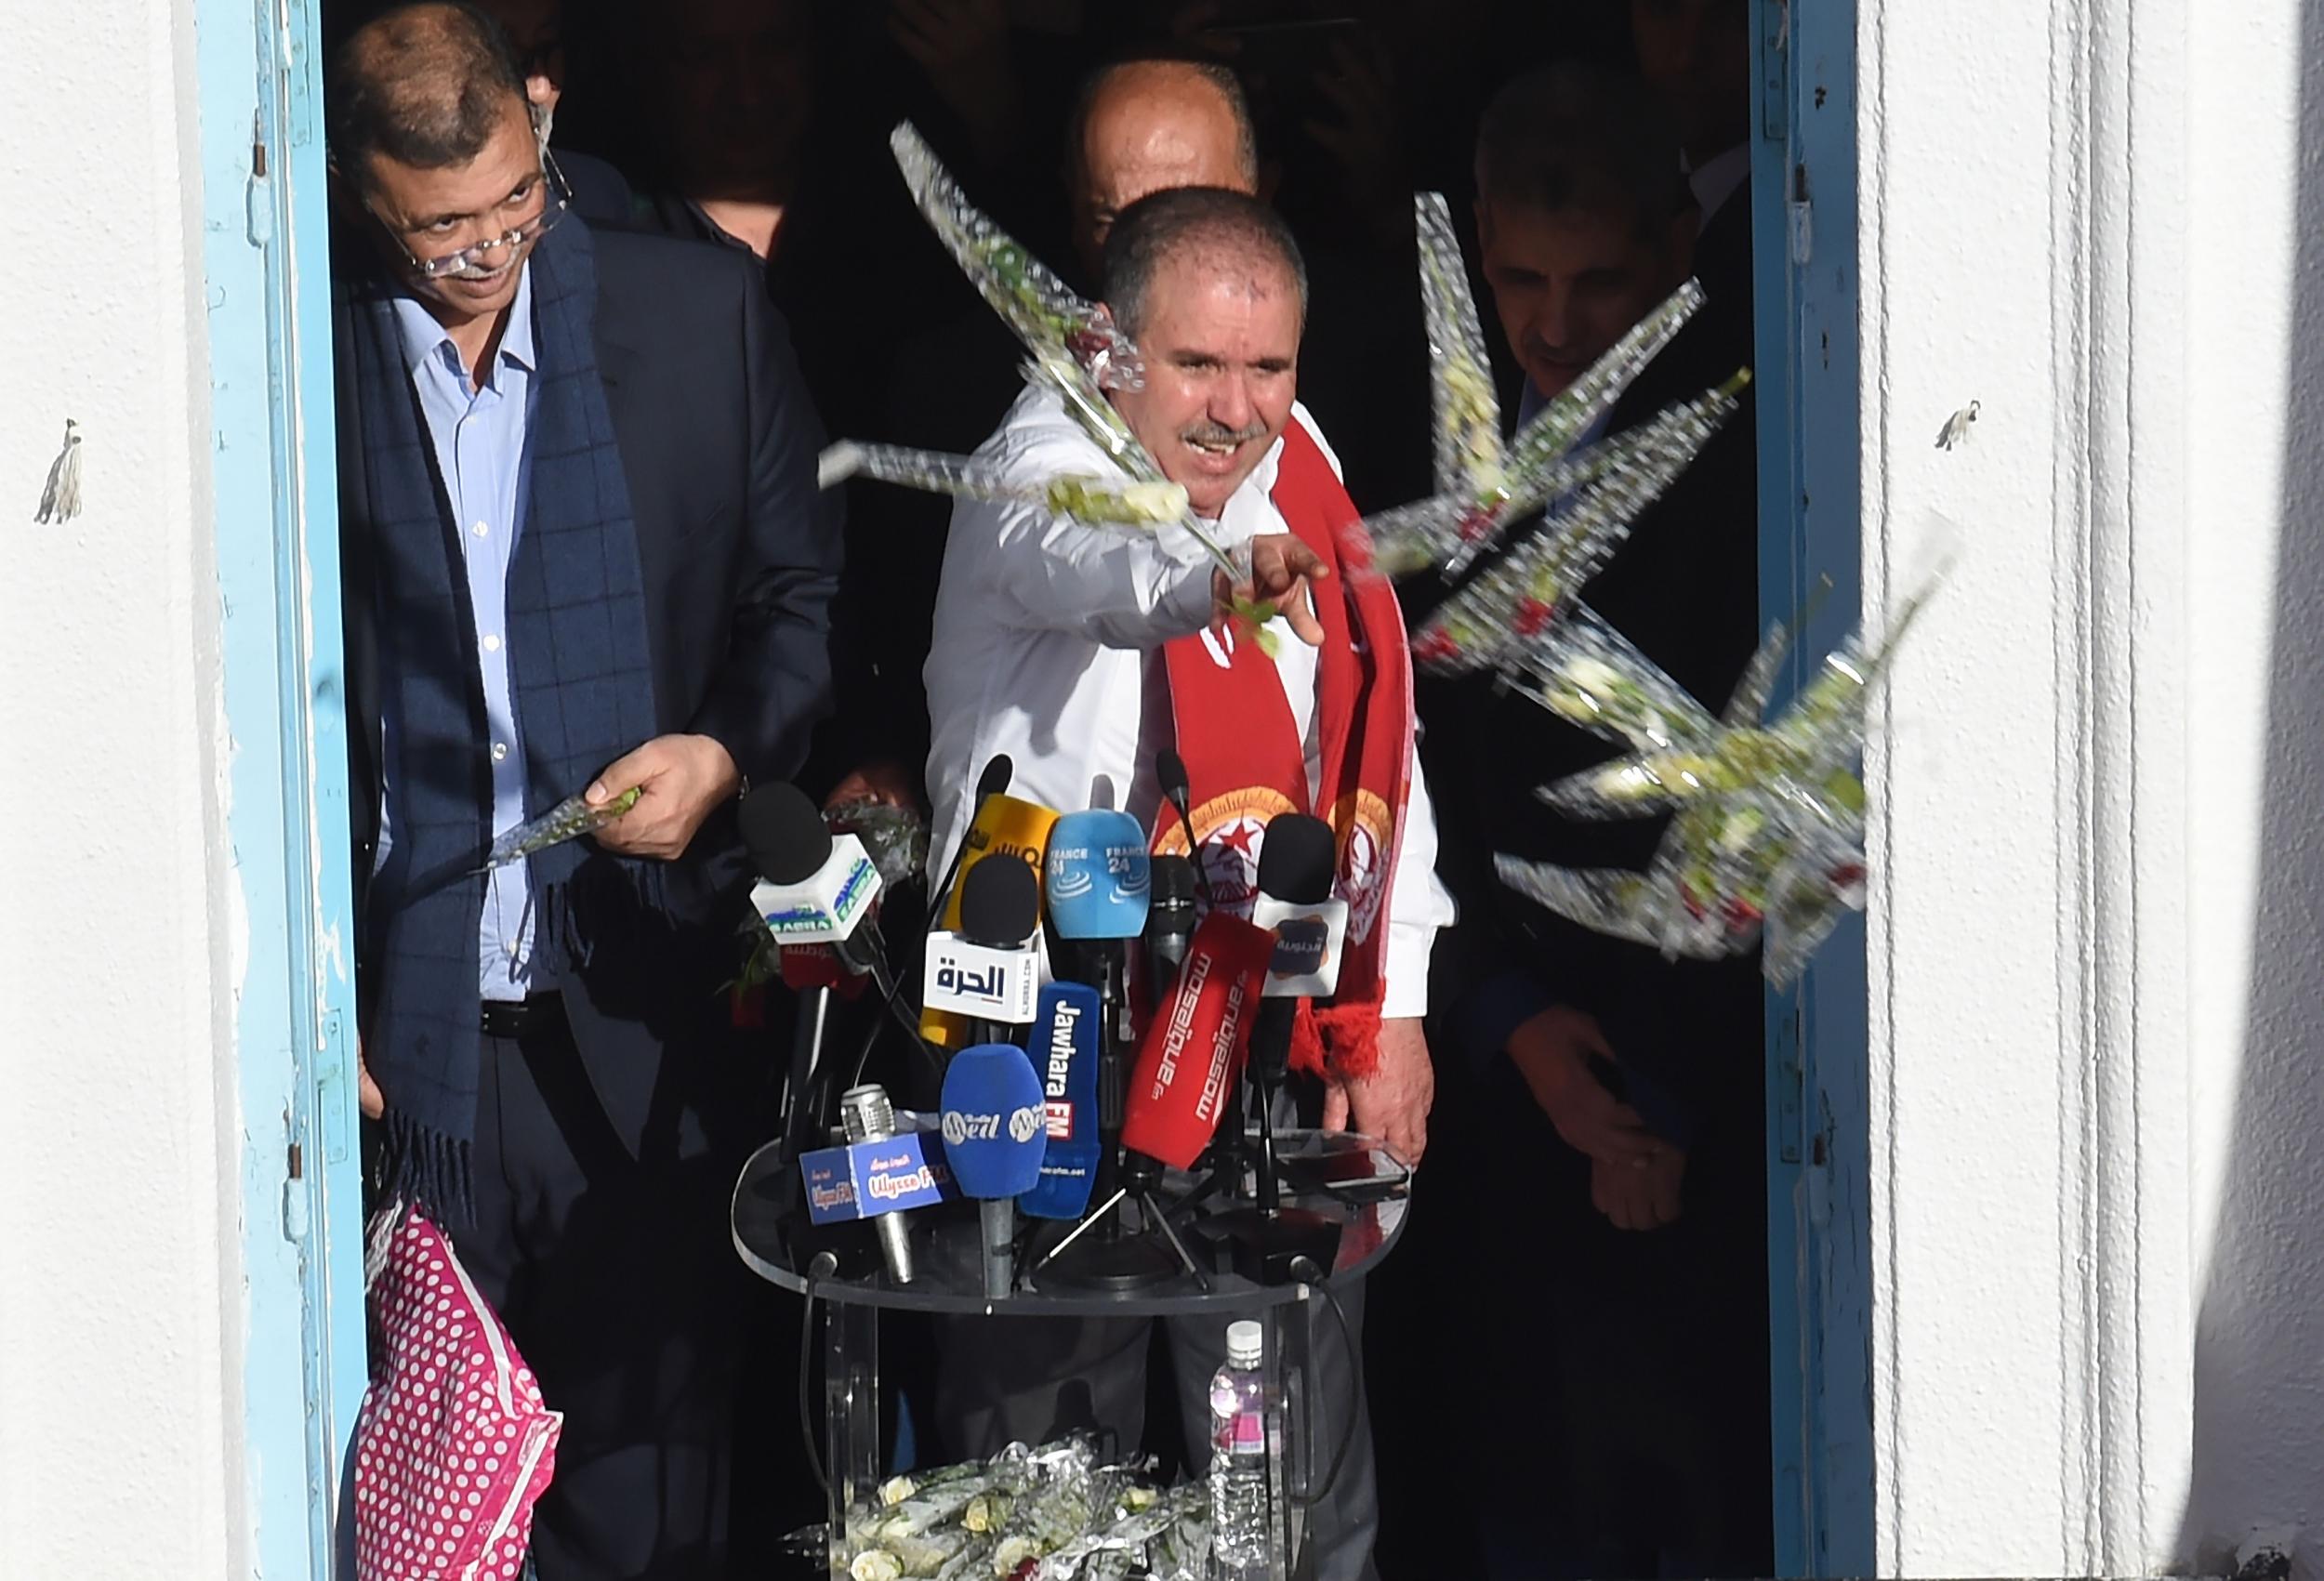 Union leader Noureddine Taboubi throws flowers at workers before his speech (AFP/Getty)